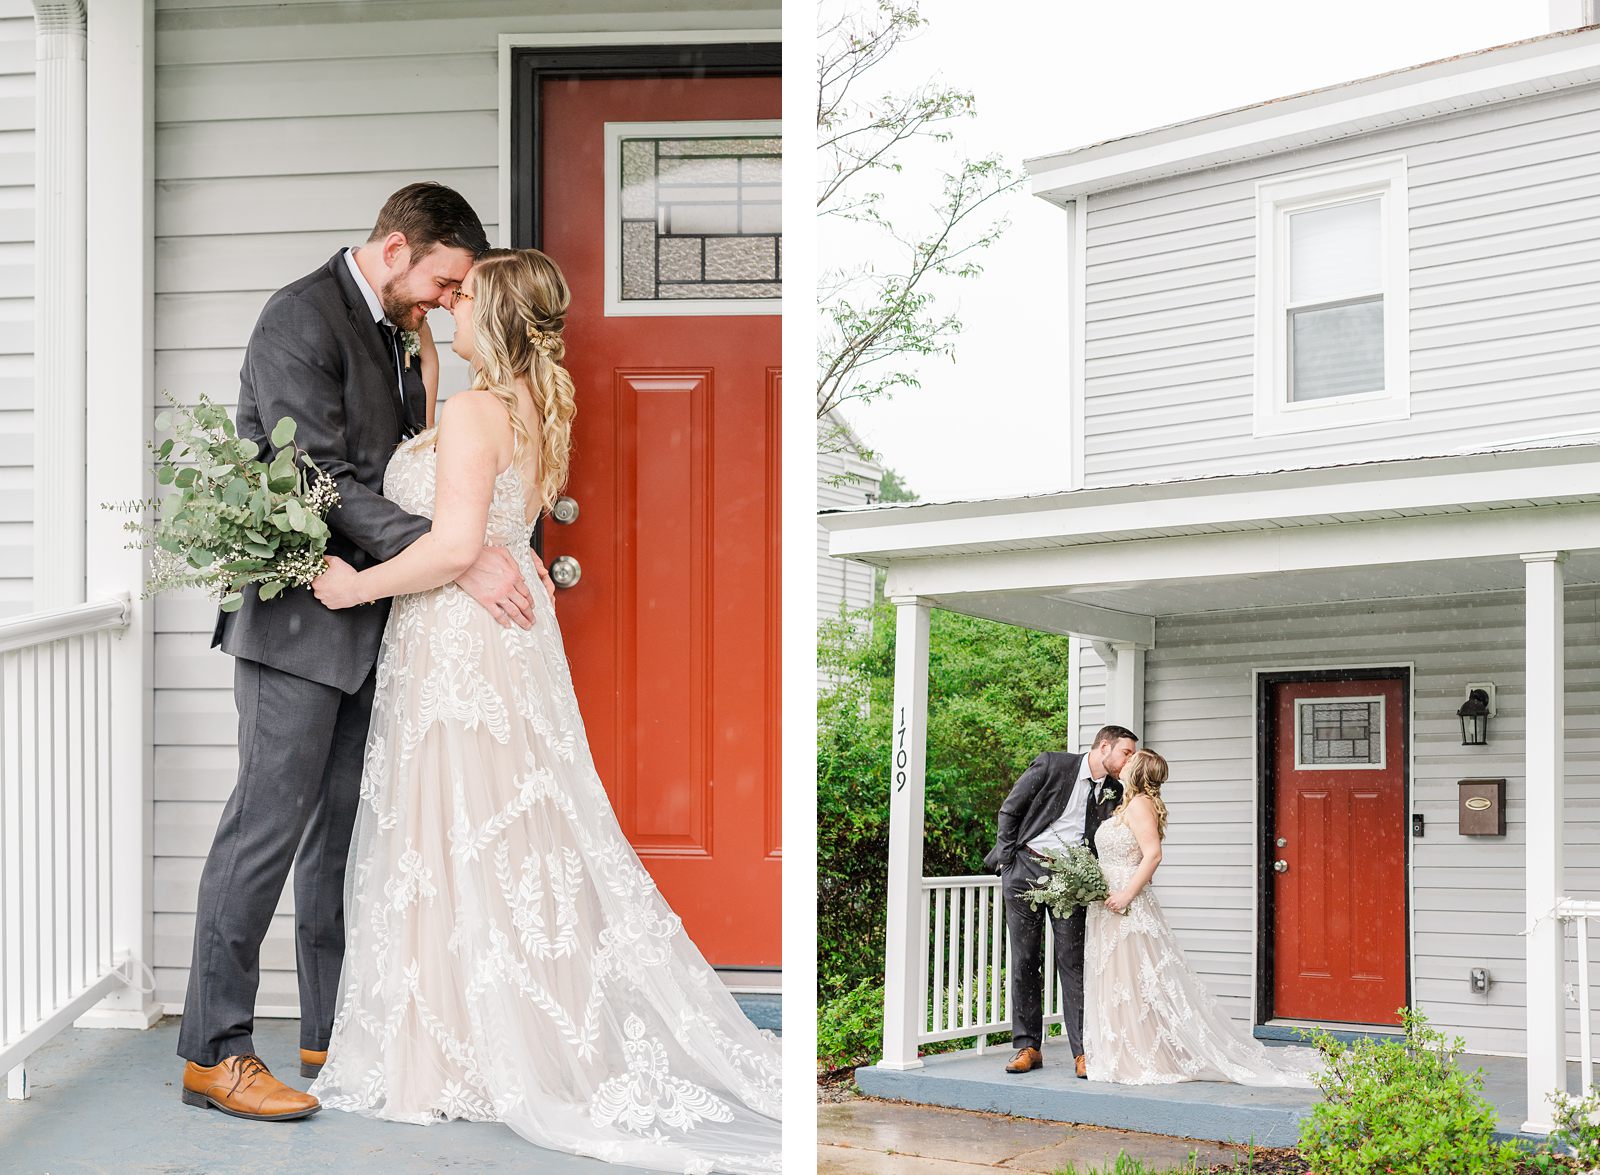 Rainy Bride and Groom First Look at Intimate Spring Richmond Wedding, by Virginia Wedding Photographer 